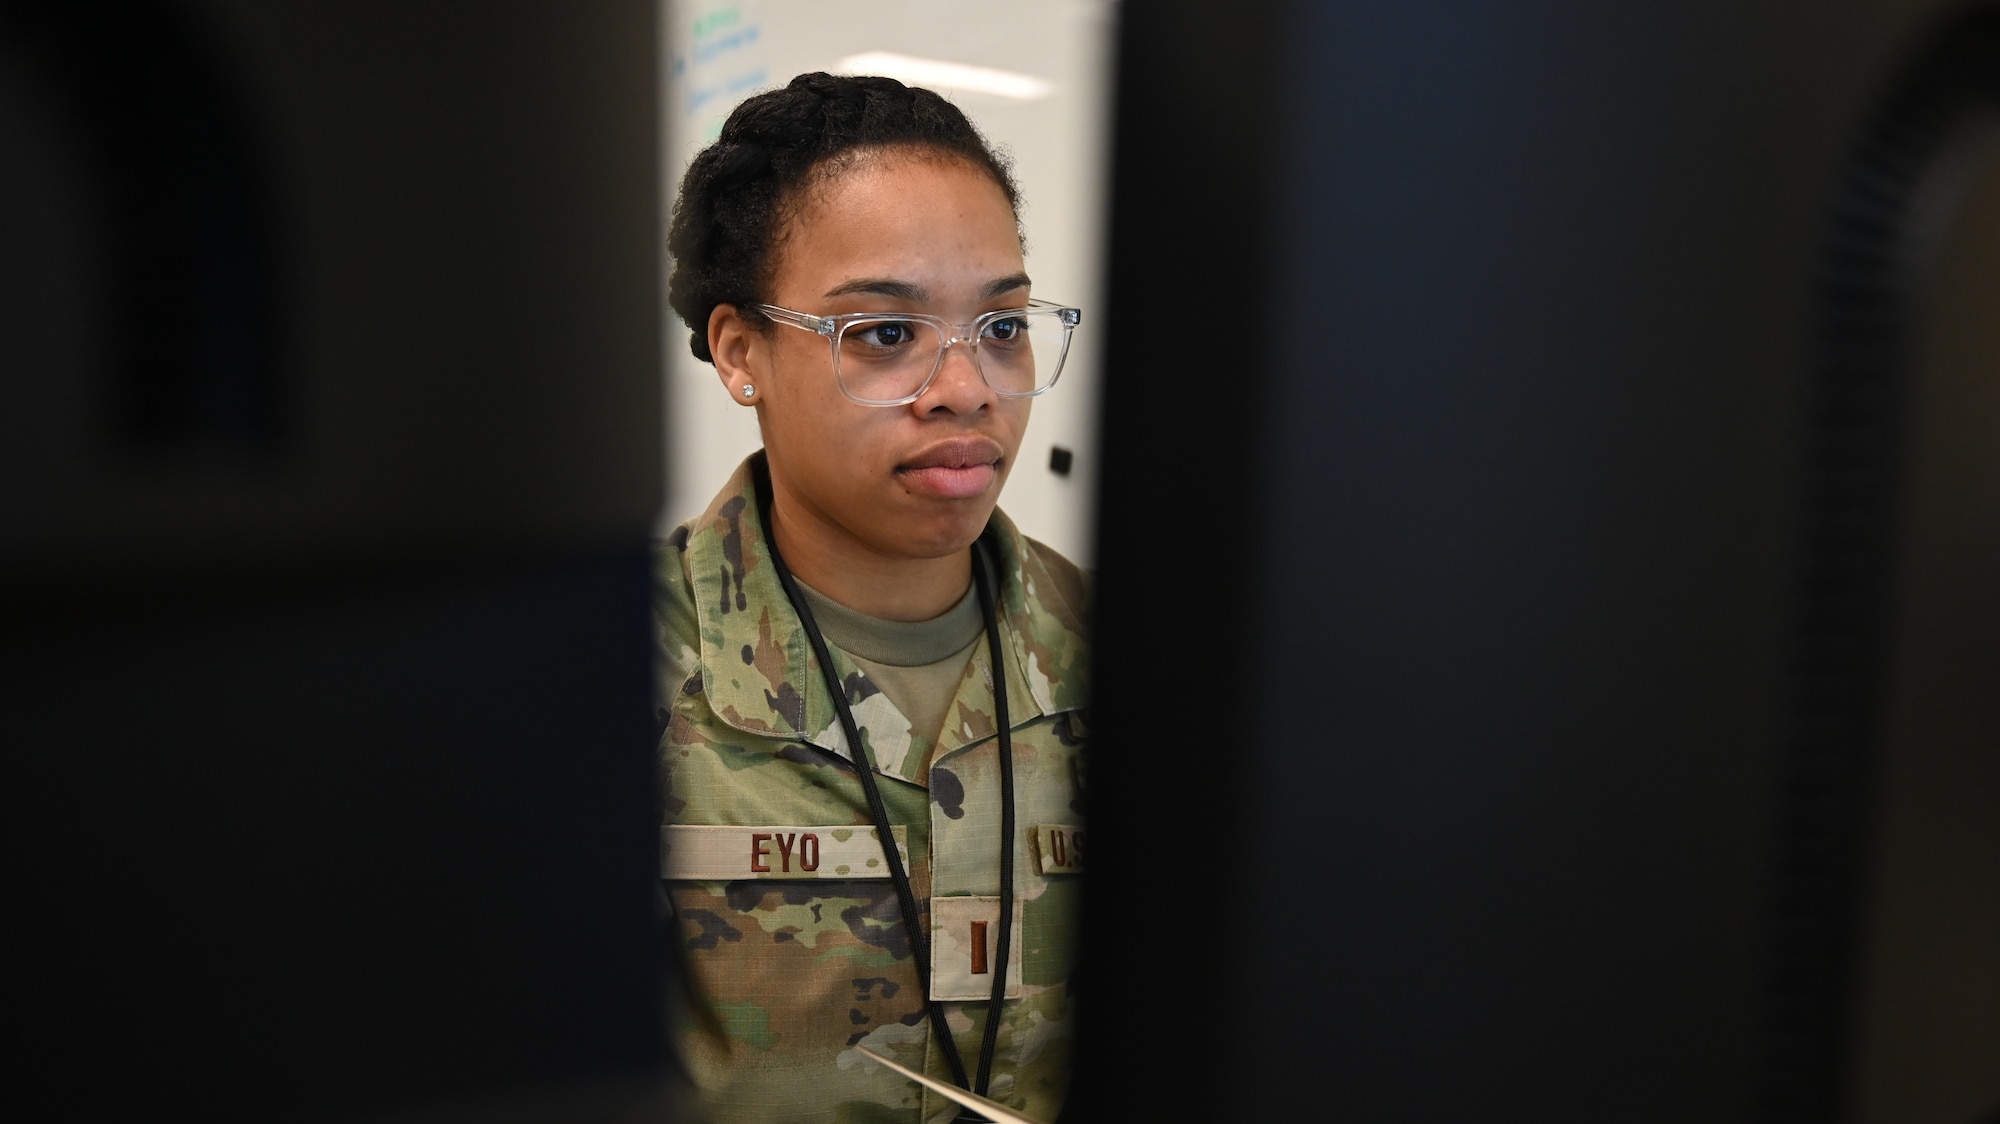 U.S. Air Force 1st Lt. Alexis Eyo, 275th Cyberspace Operations Squadron cyber officer, Maryland Air National Guard works at a computer during Cyber Blitz 22-3 at Warfield Air National Guard Base, Middle River, Maryland on March 23, 2022.